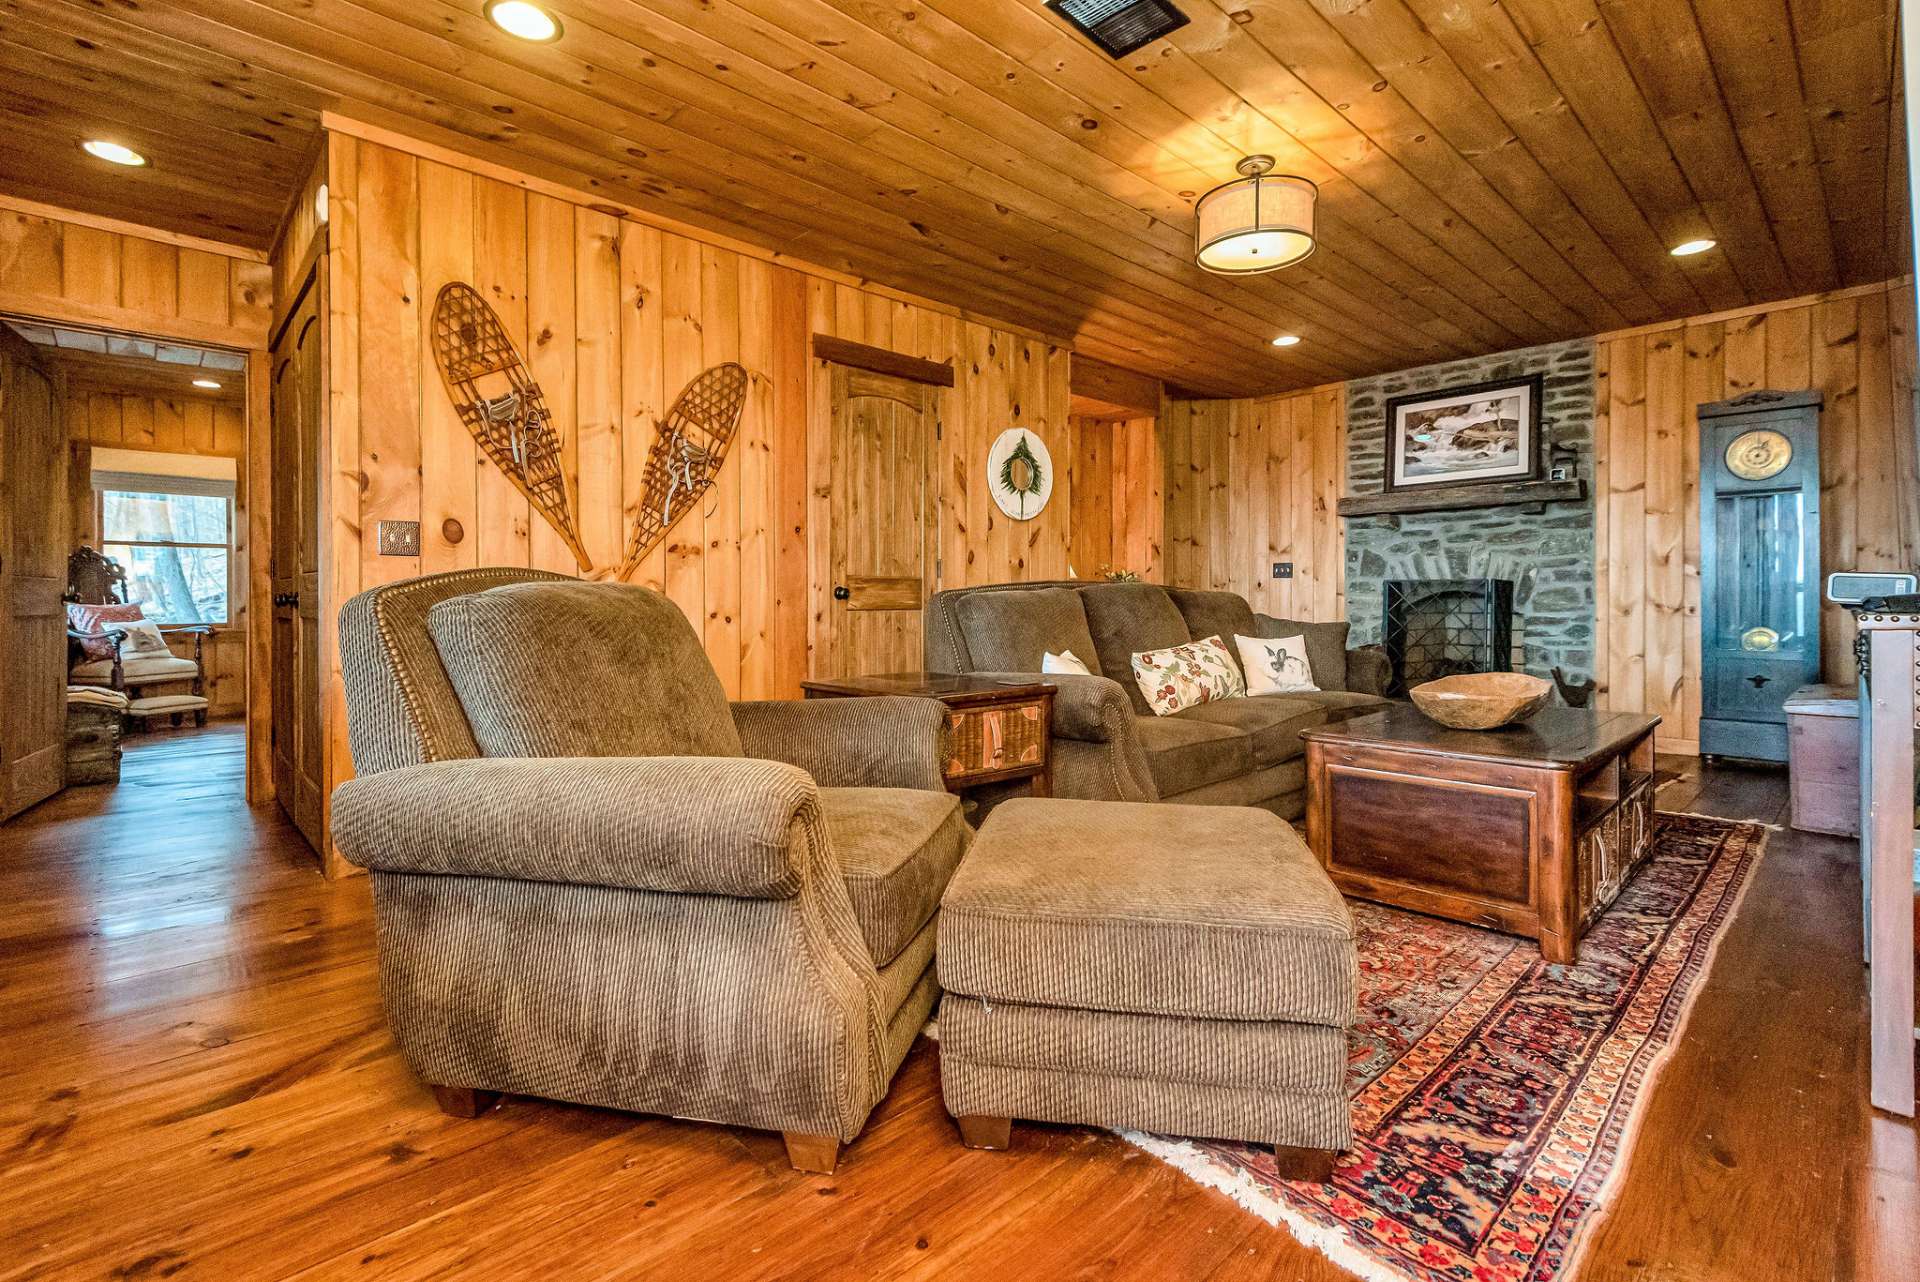 A second stone gas fireplace provides the coziness of cabin life into the lower level.